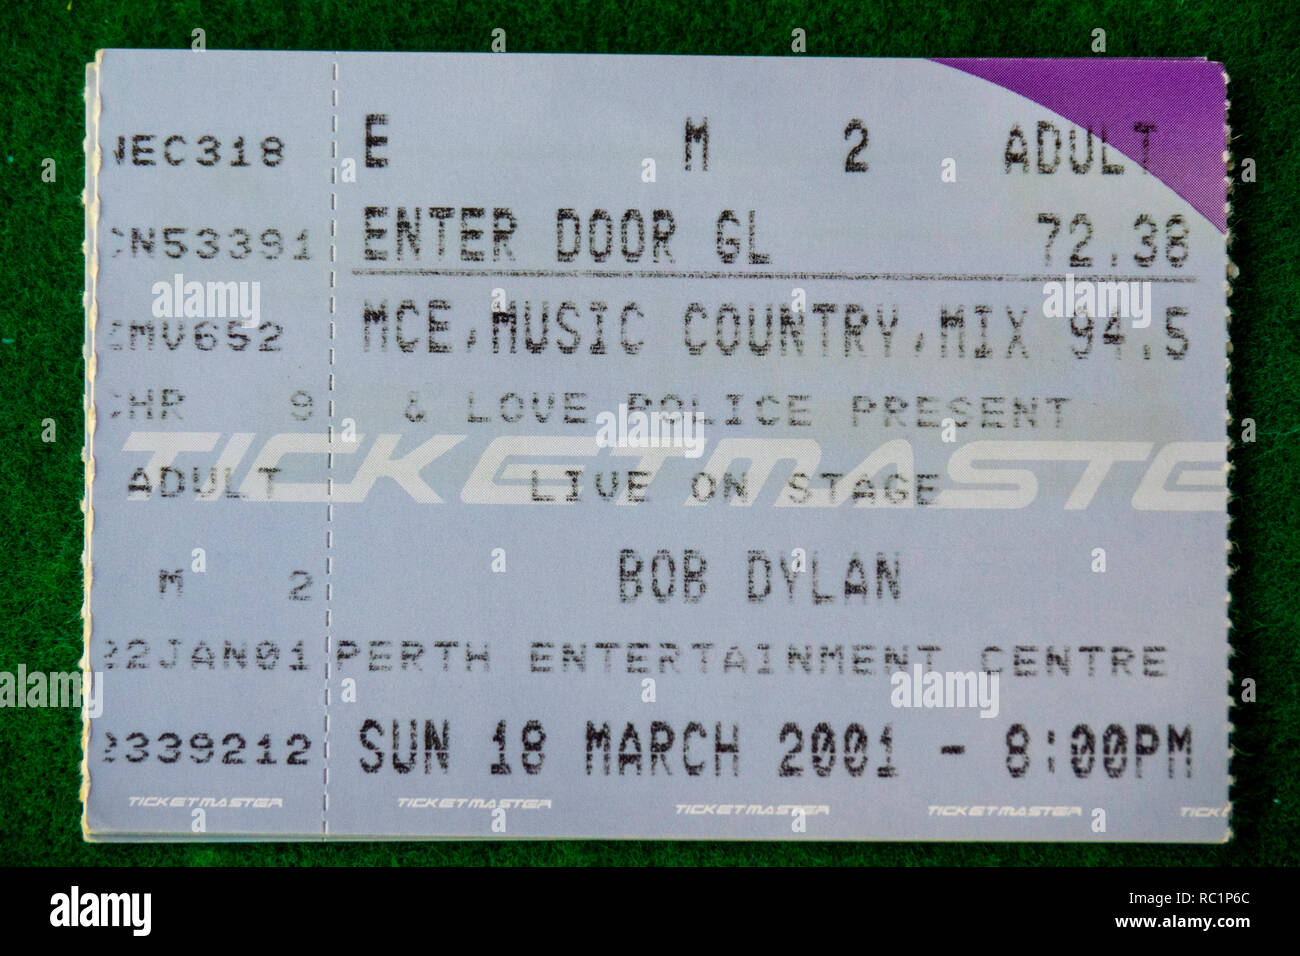 Ticket for Bob Dylan concert at Perth Entertainment Centre in 2001 WA Australia. Stock Photo